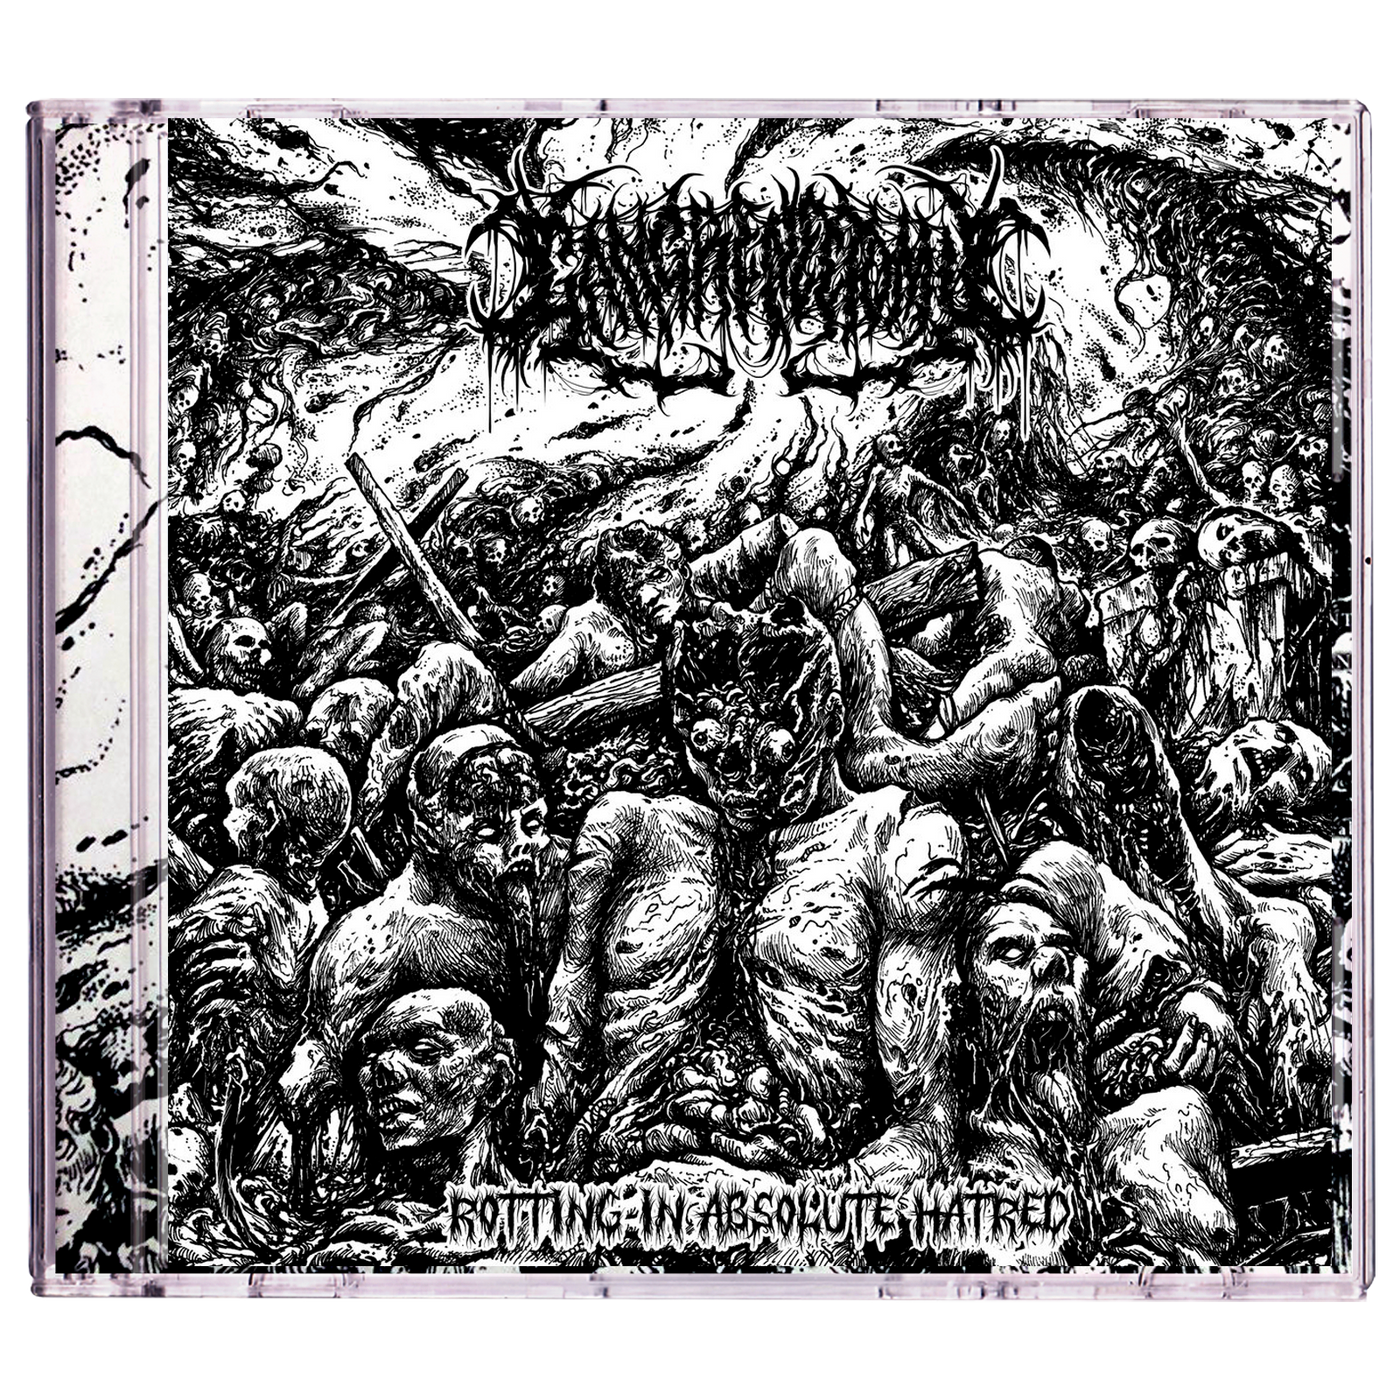 Gangrenectomy 'Rotting In Absolute Hatred' CD